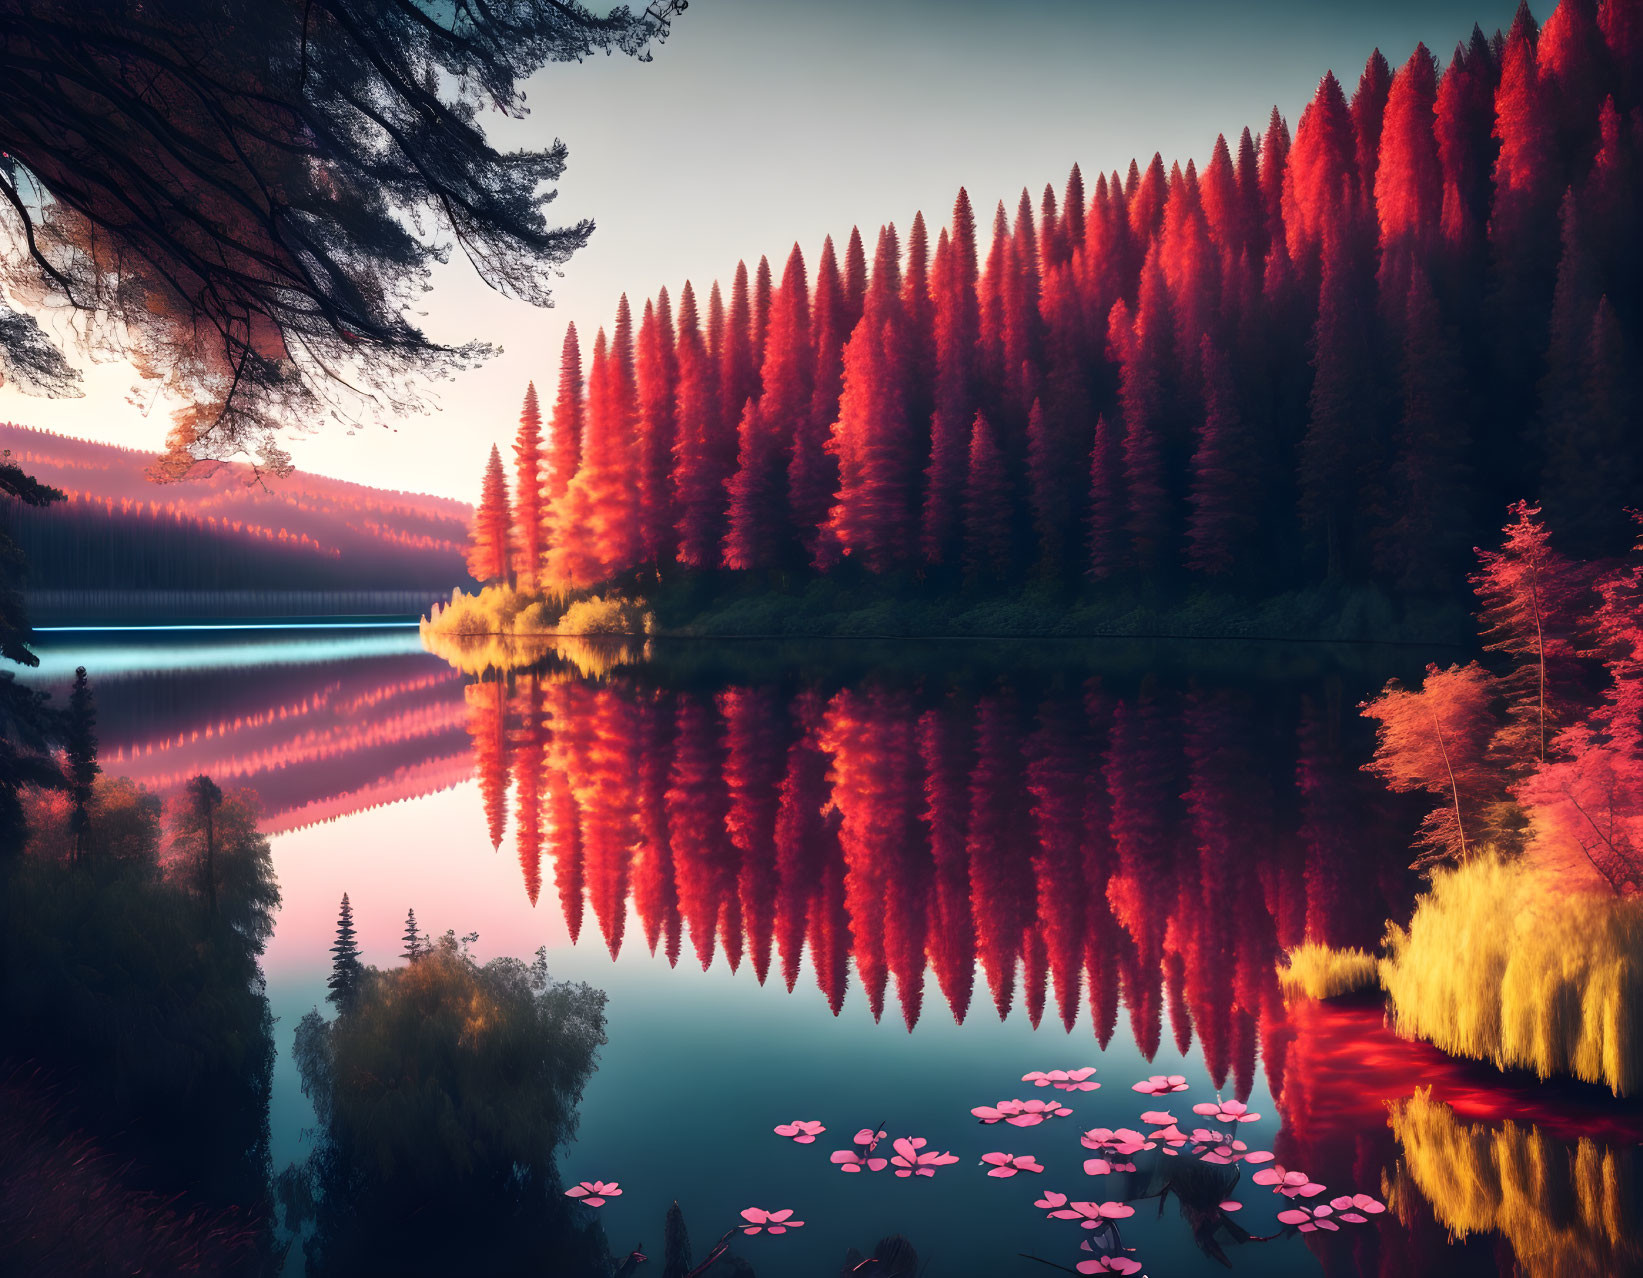 A beautiful forest next to a lake.